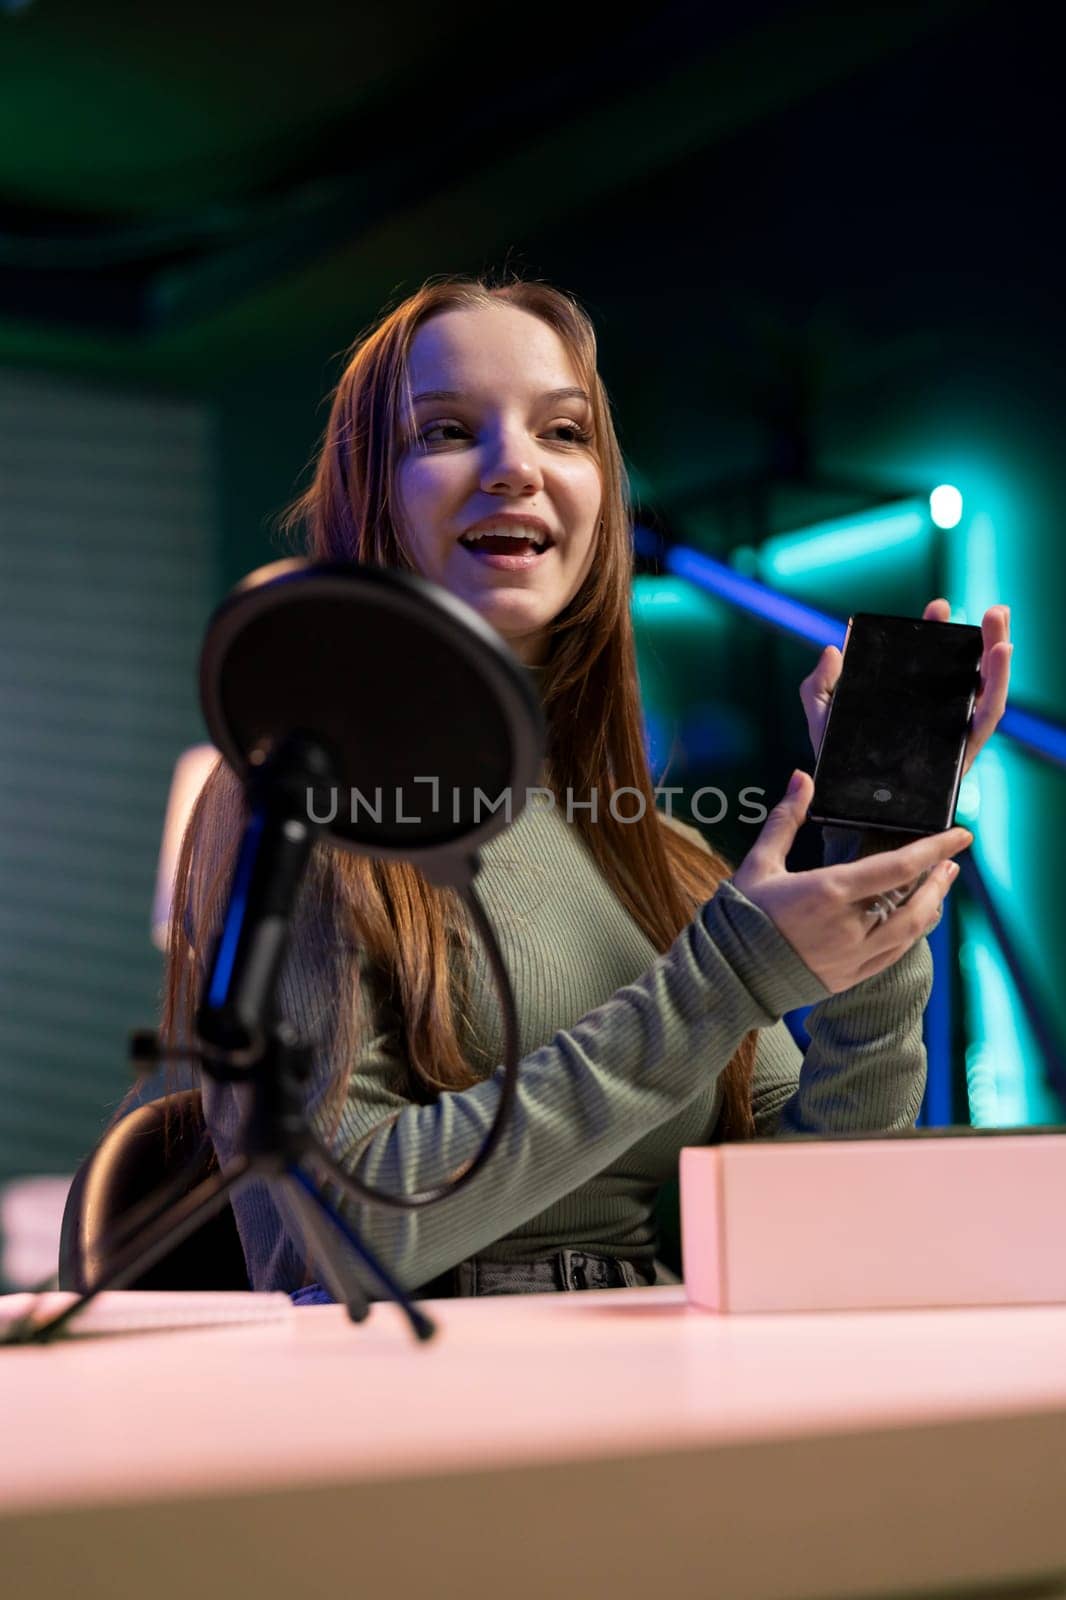 Teenager content creator filming technology review of newly released smartphone by DCStudio